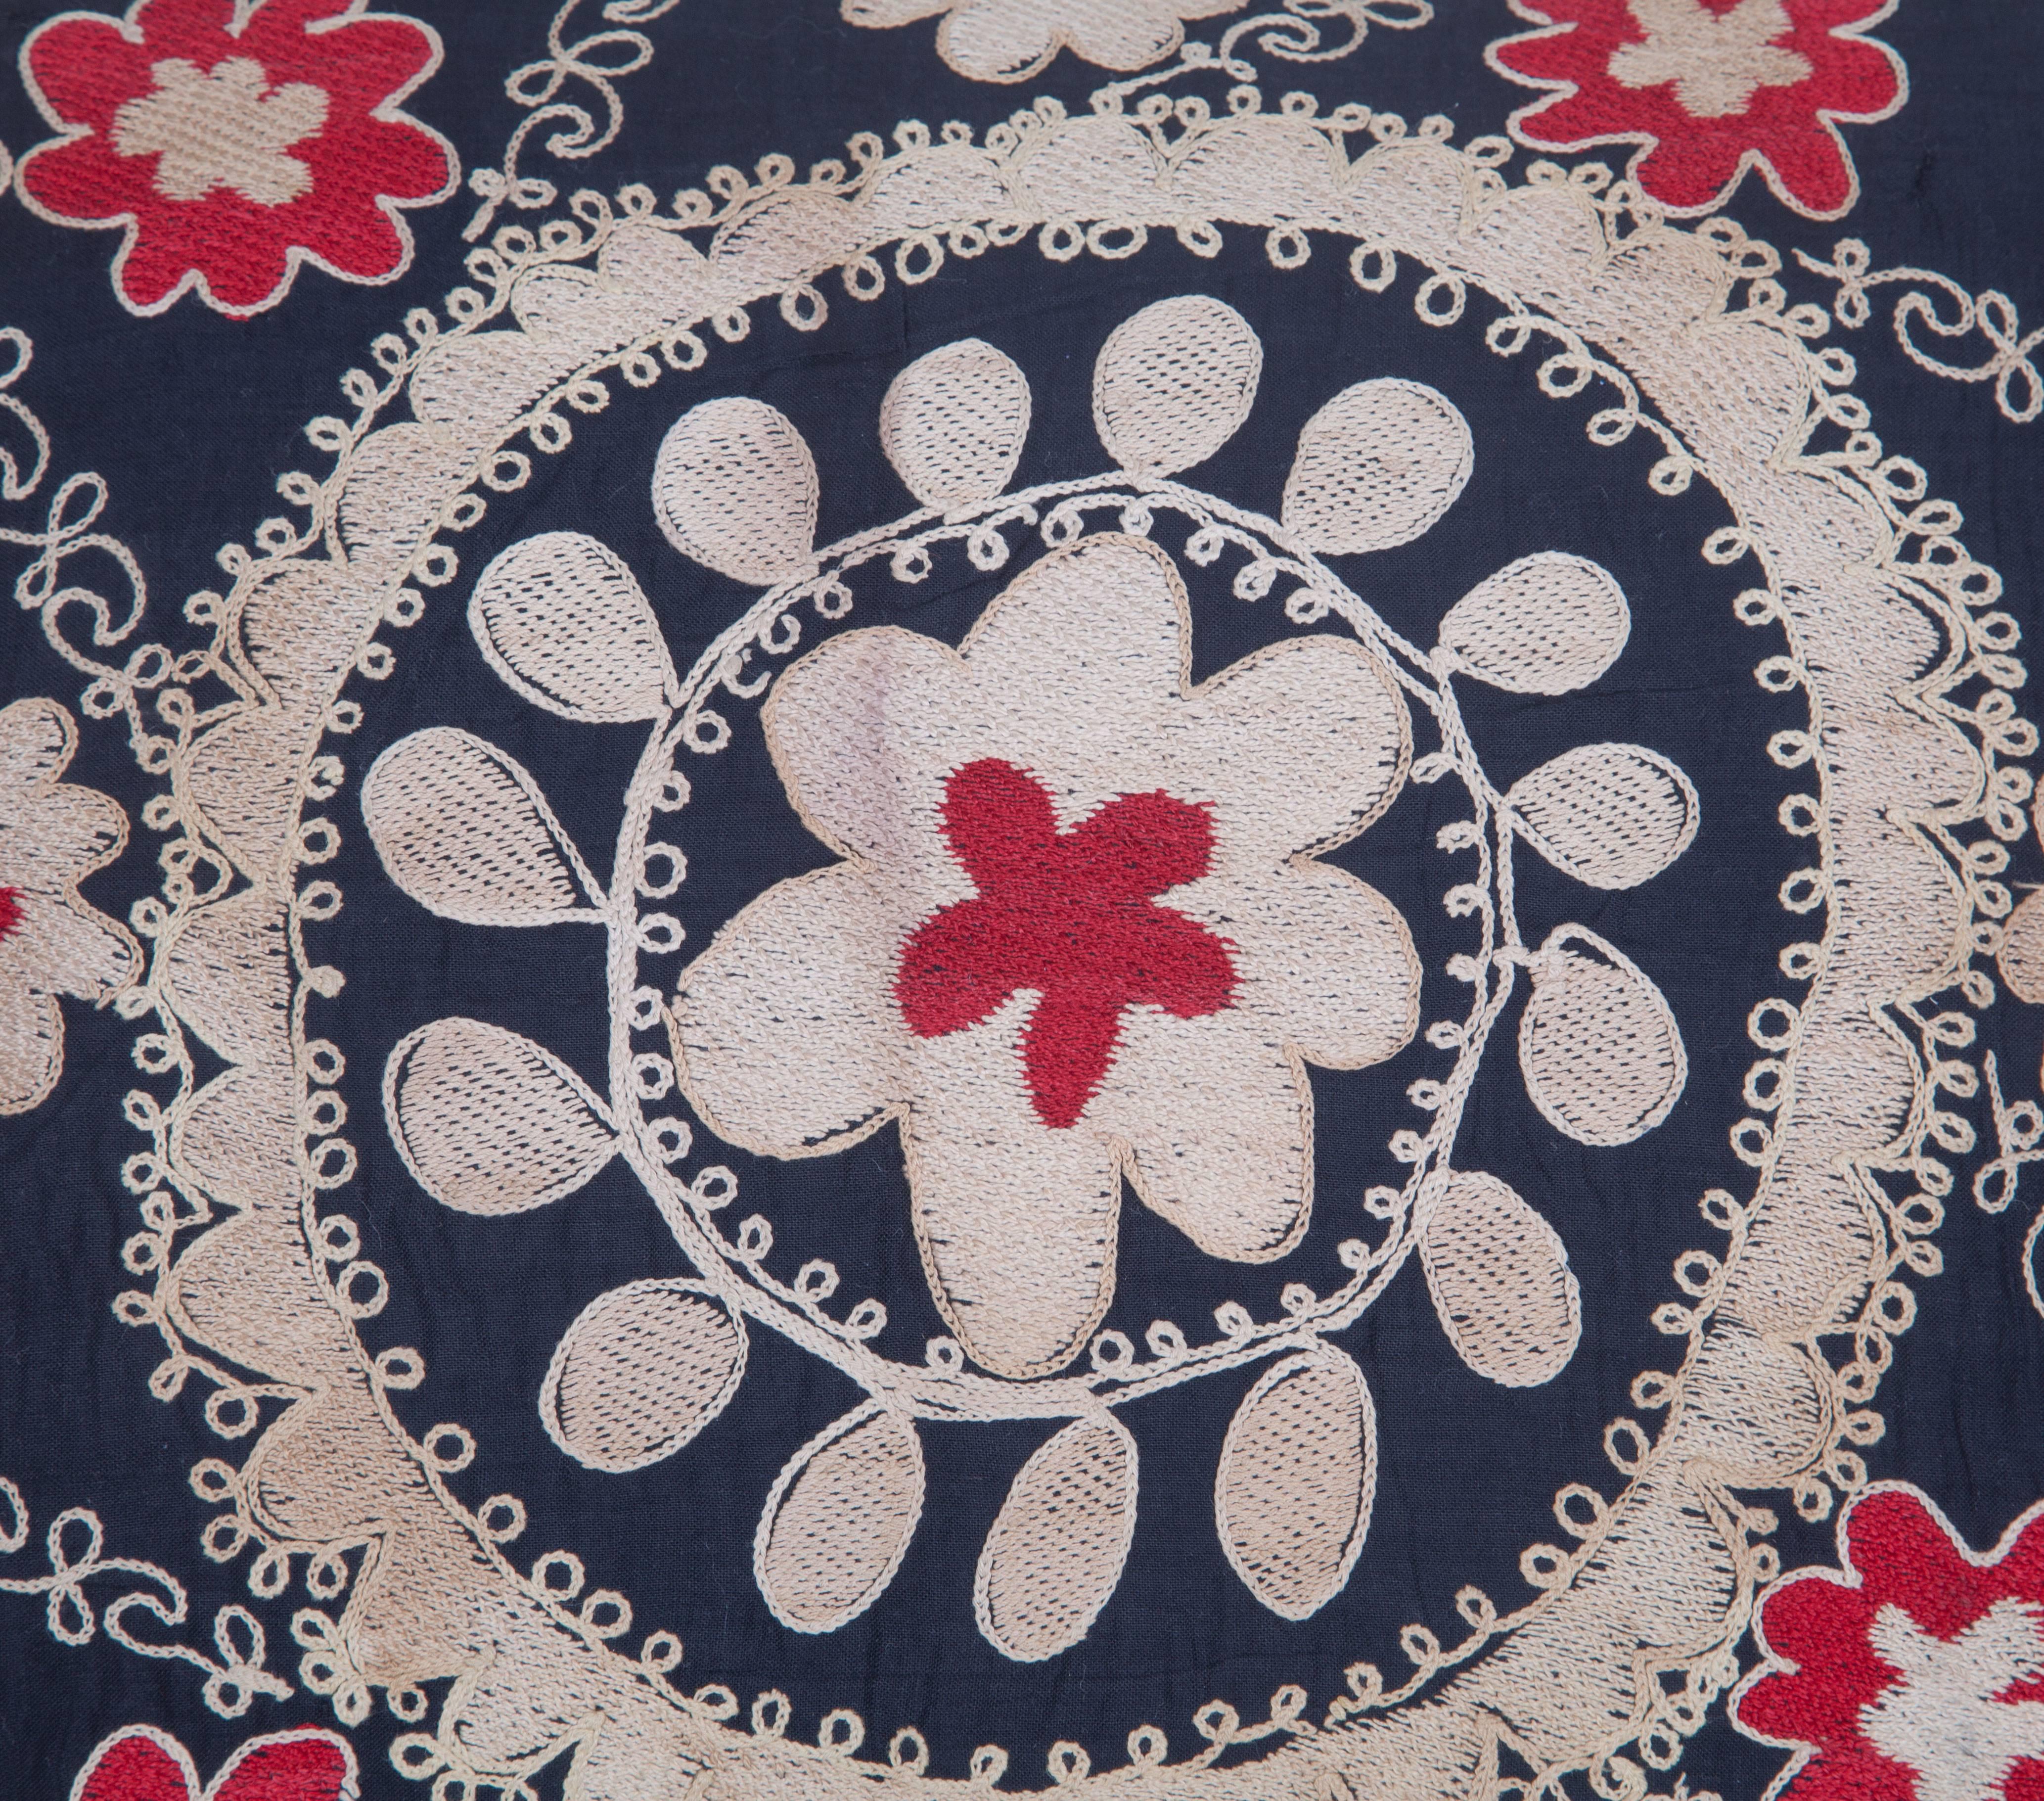 The pillow is made out of mid-20th century, Uzbek Samarkand Suzani. It does not come with an insert but it comes with a bag made to the size and out of cotton to accommodate the filling. The backing is made of linen. Please note ' filling is not